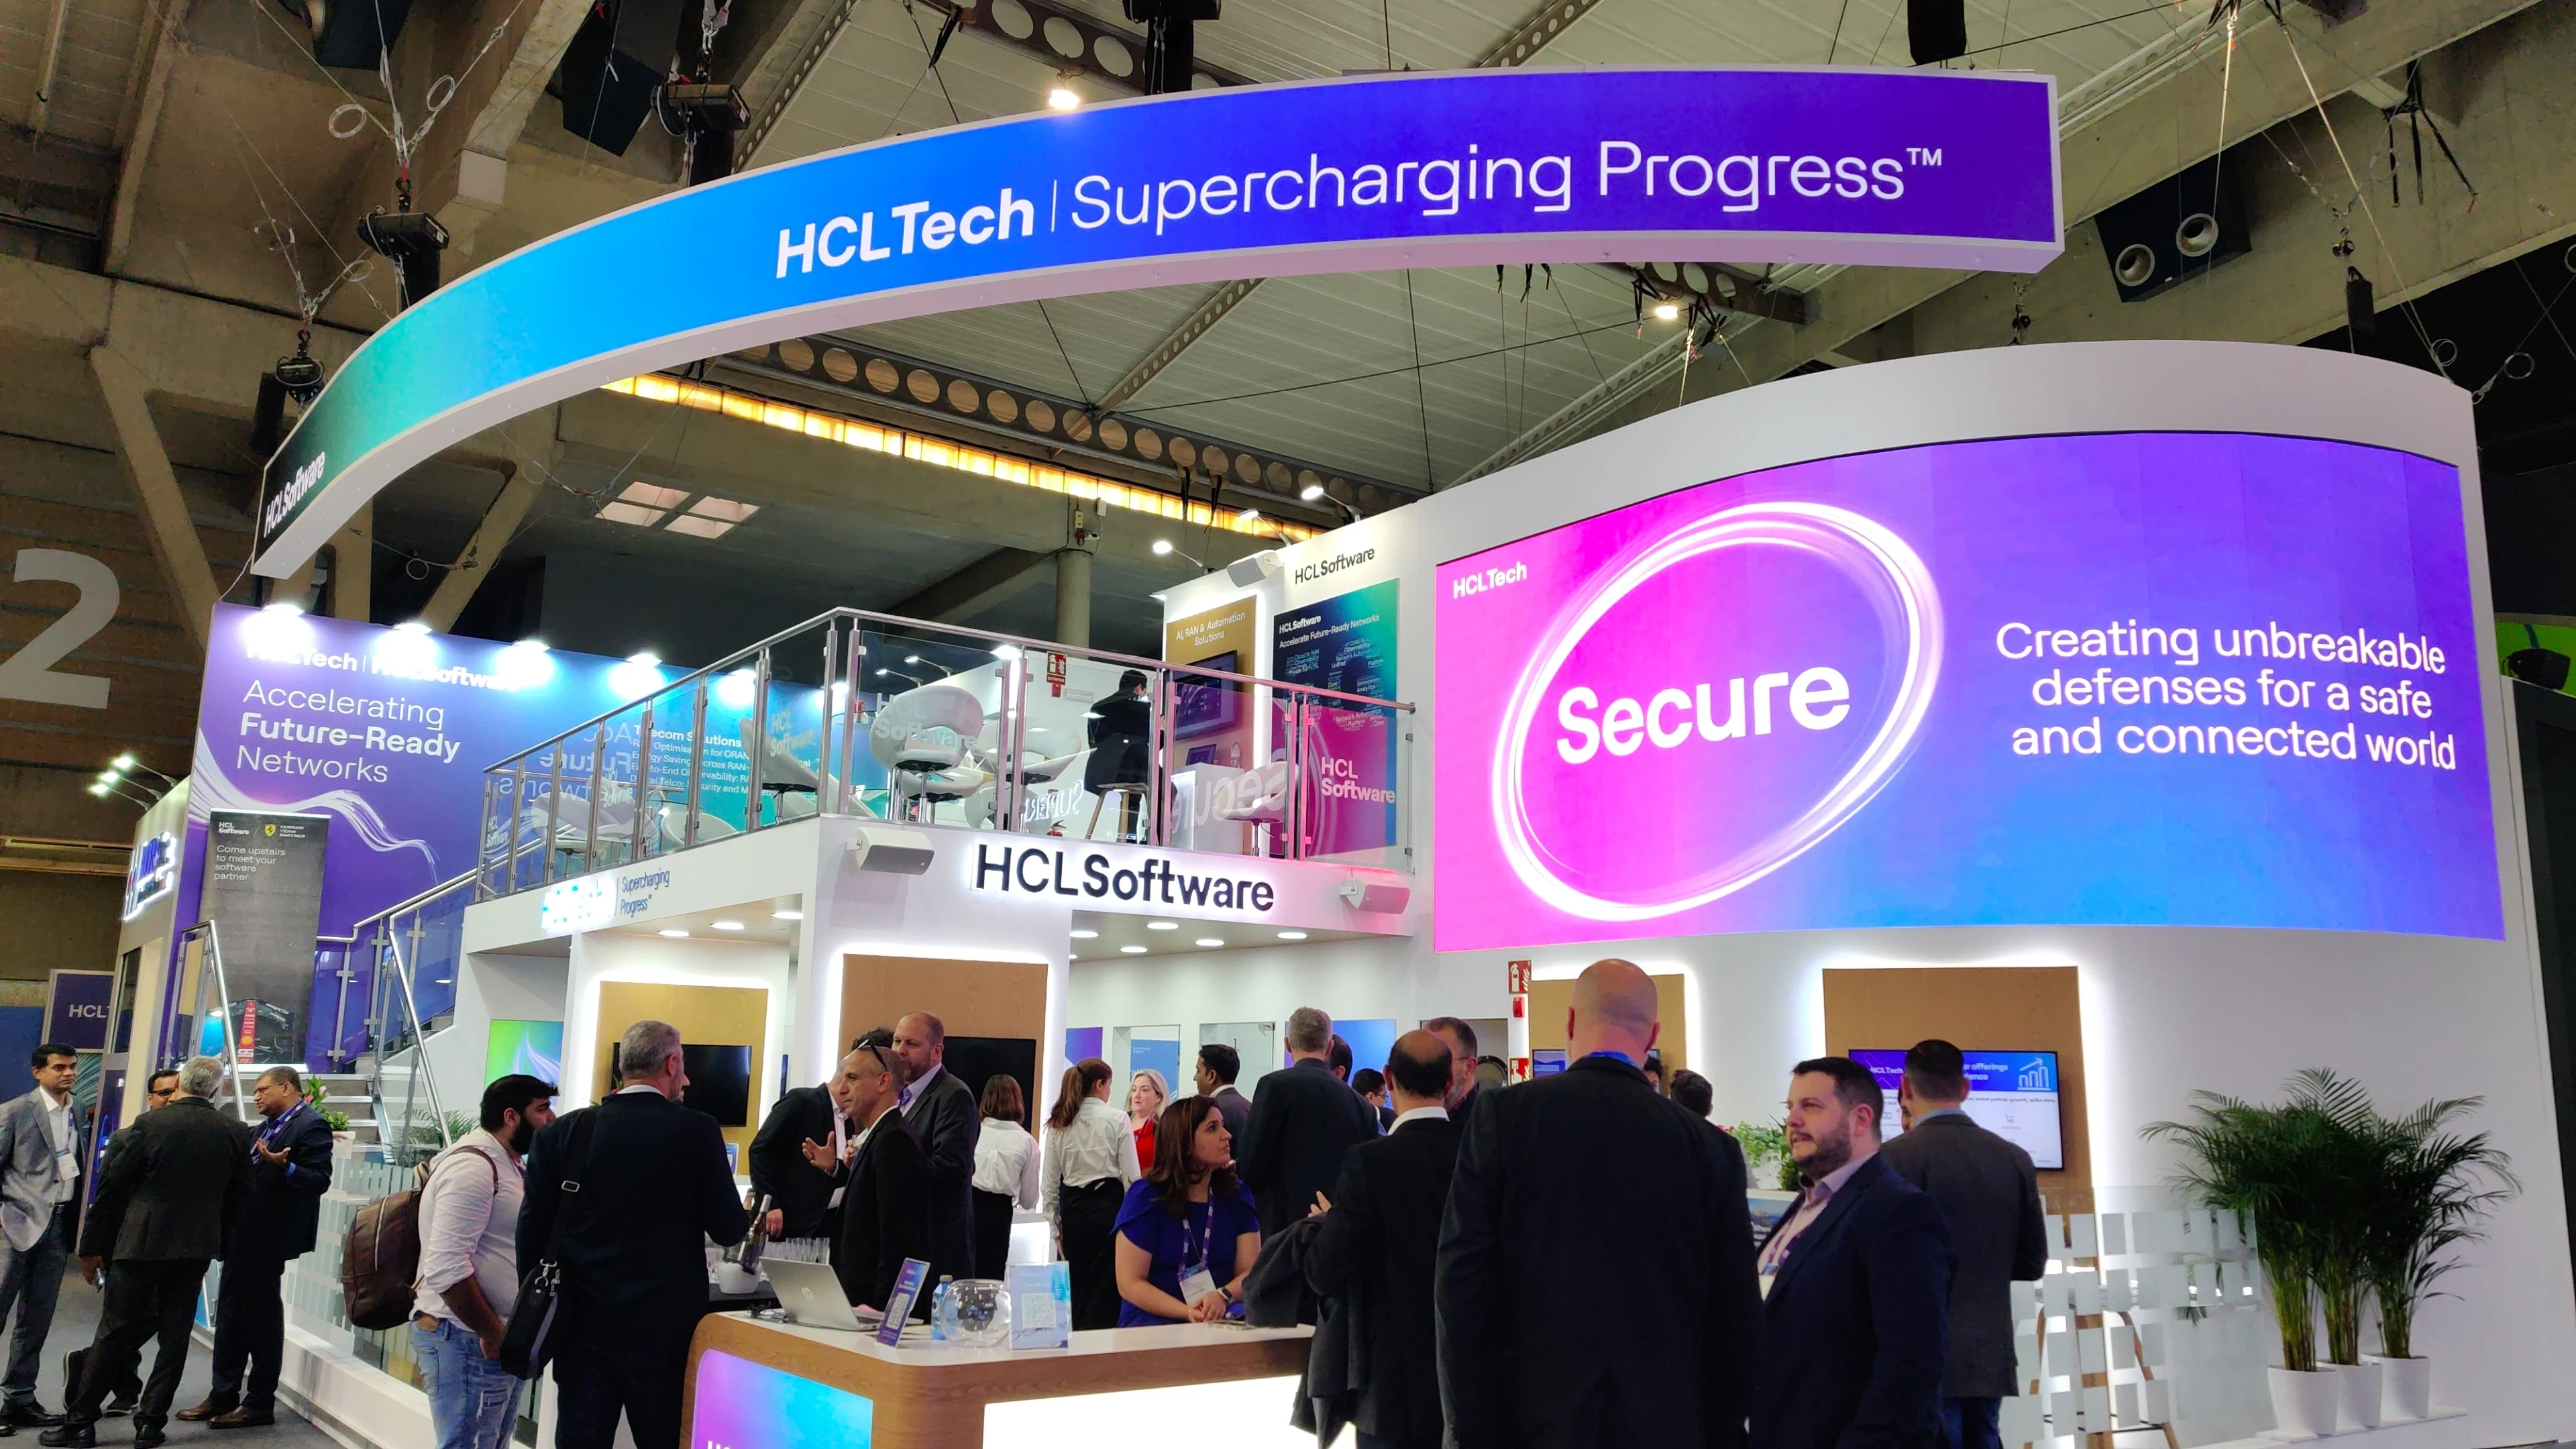 The HCLTech booth at MWC 2024